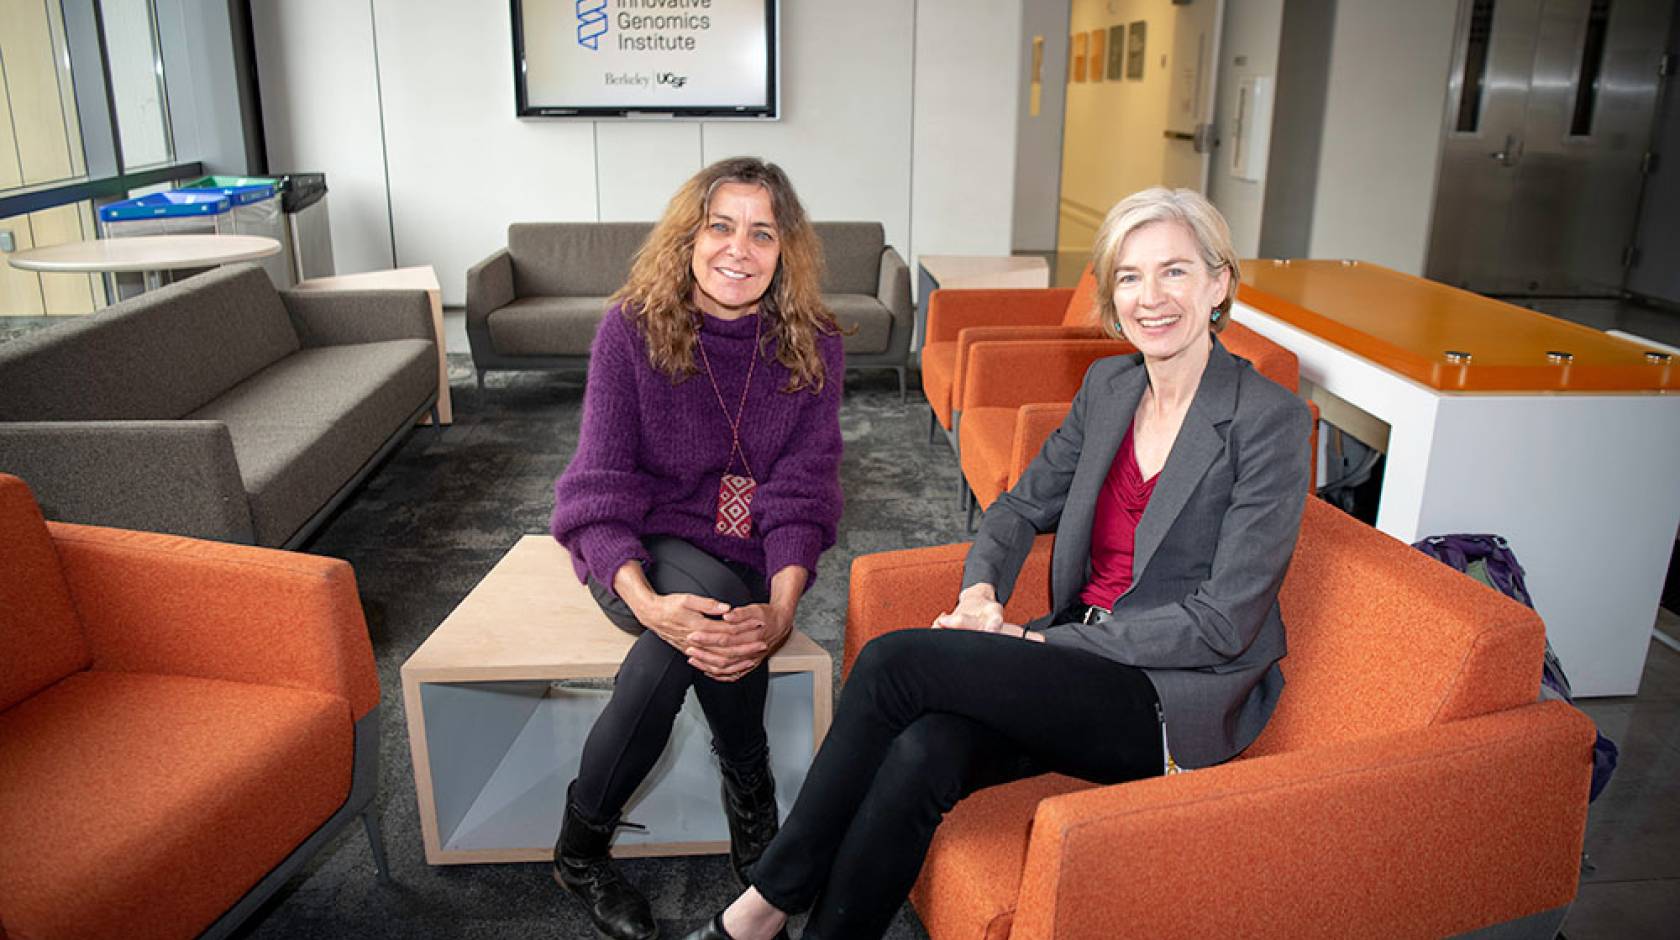 Jill Banfield (left) and Jennifer Doudna (right) in the IGI Building at UC Berkeley